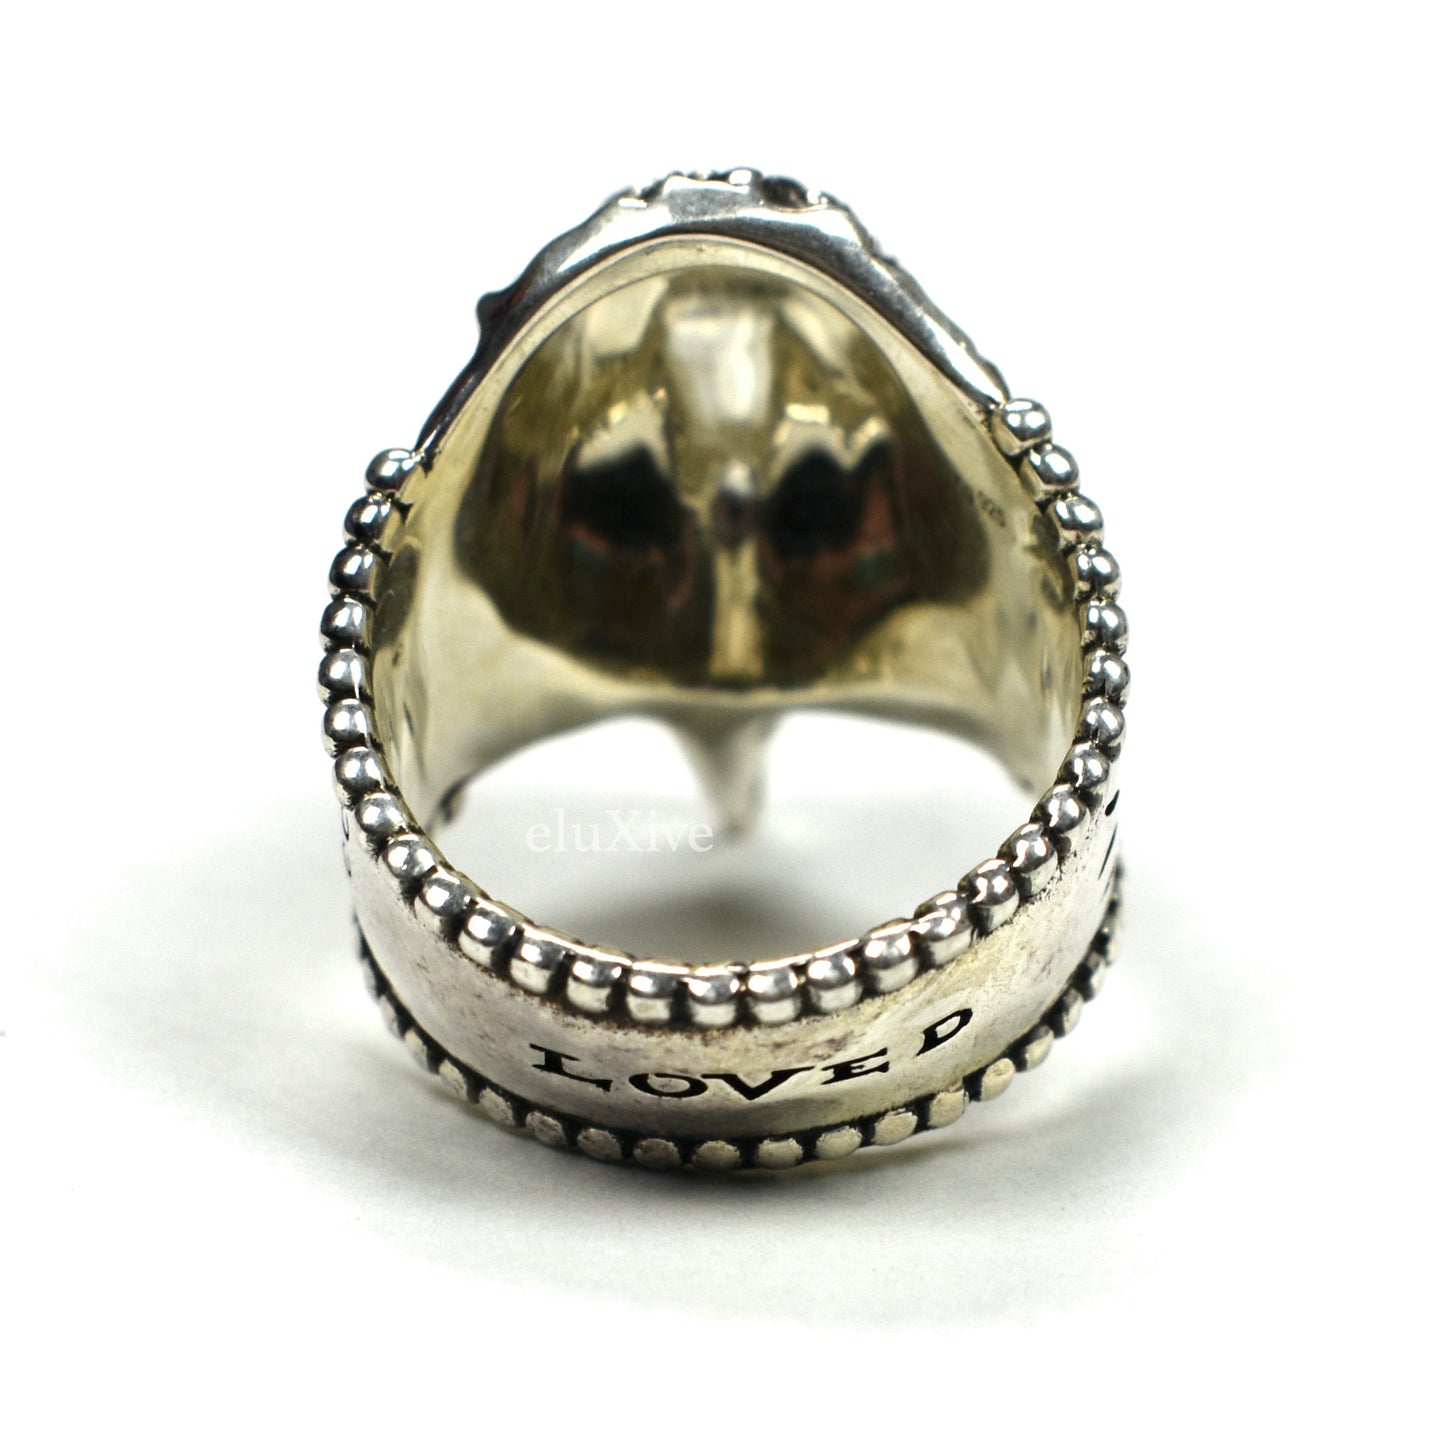 Gucci - Silver Anger Forest Eagle Statement Ring